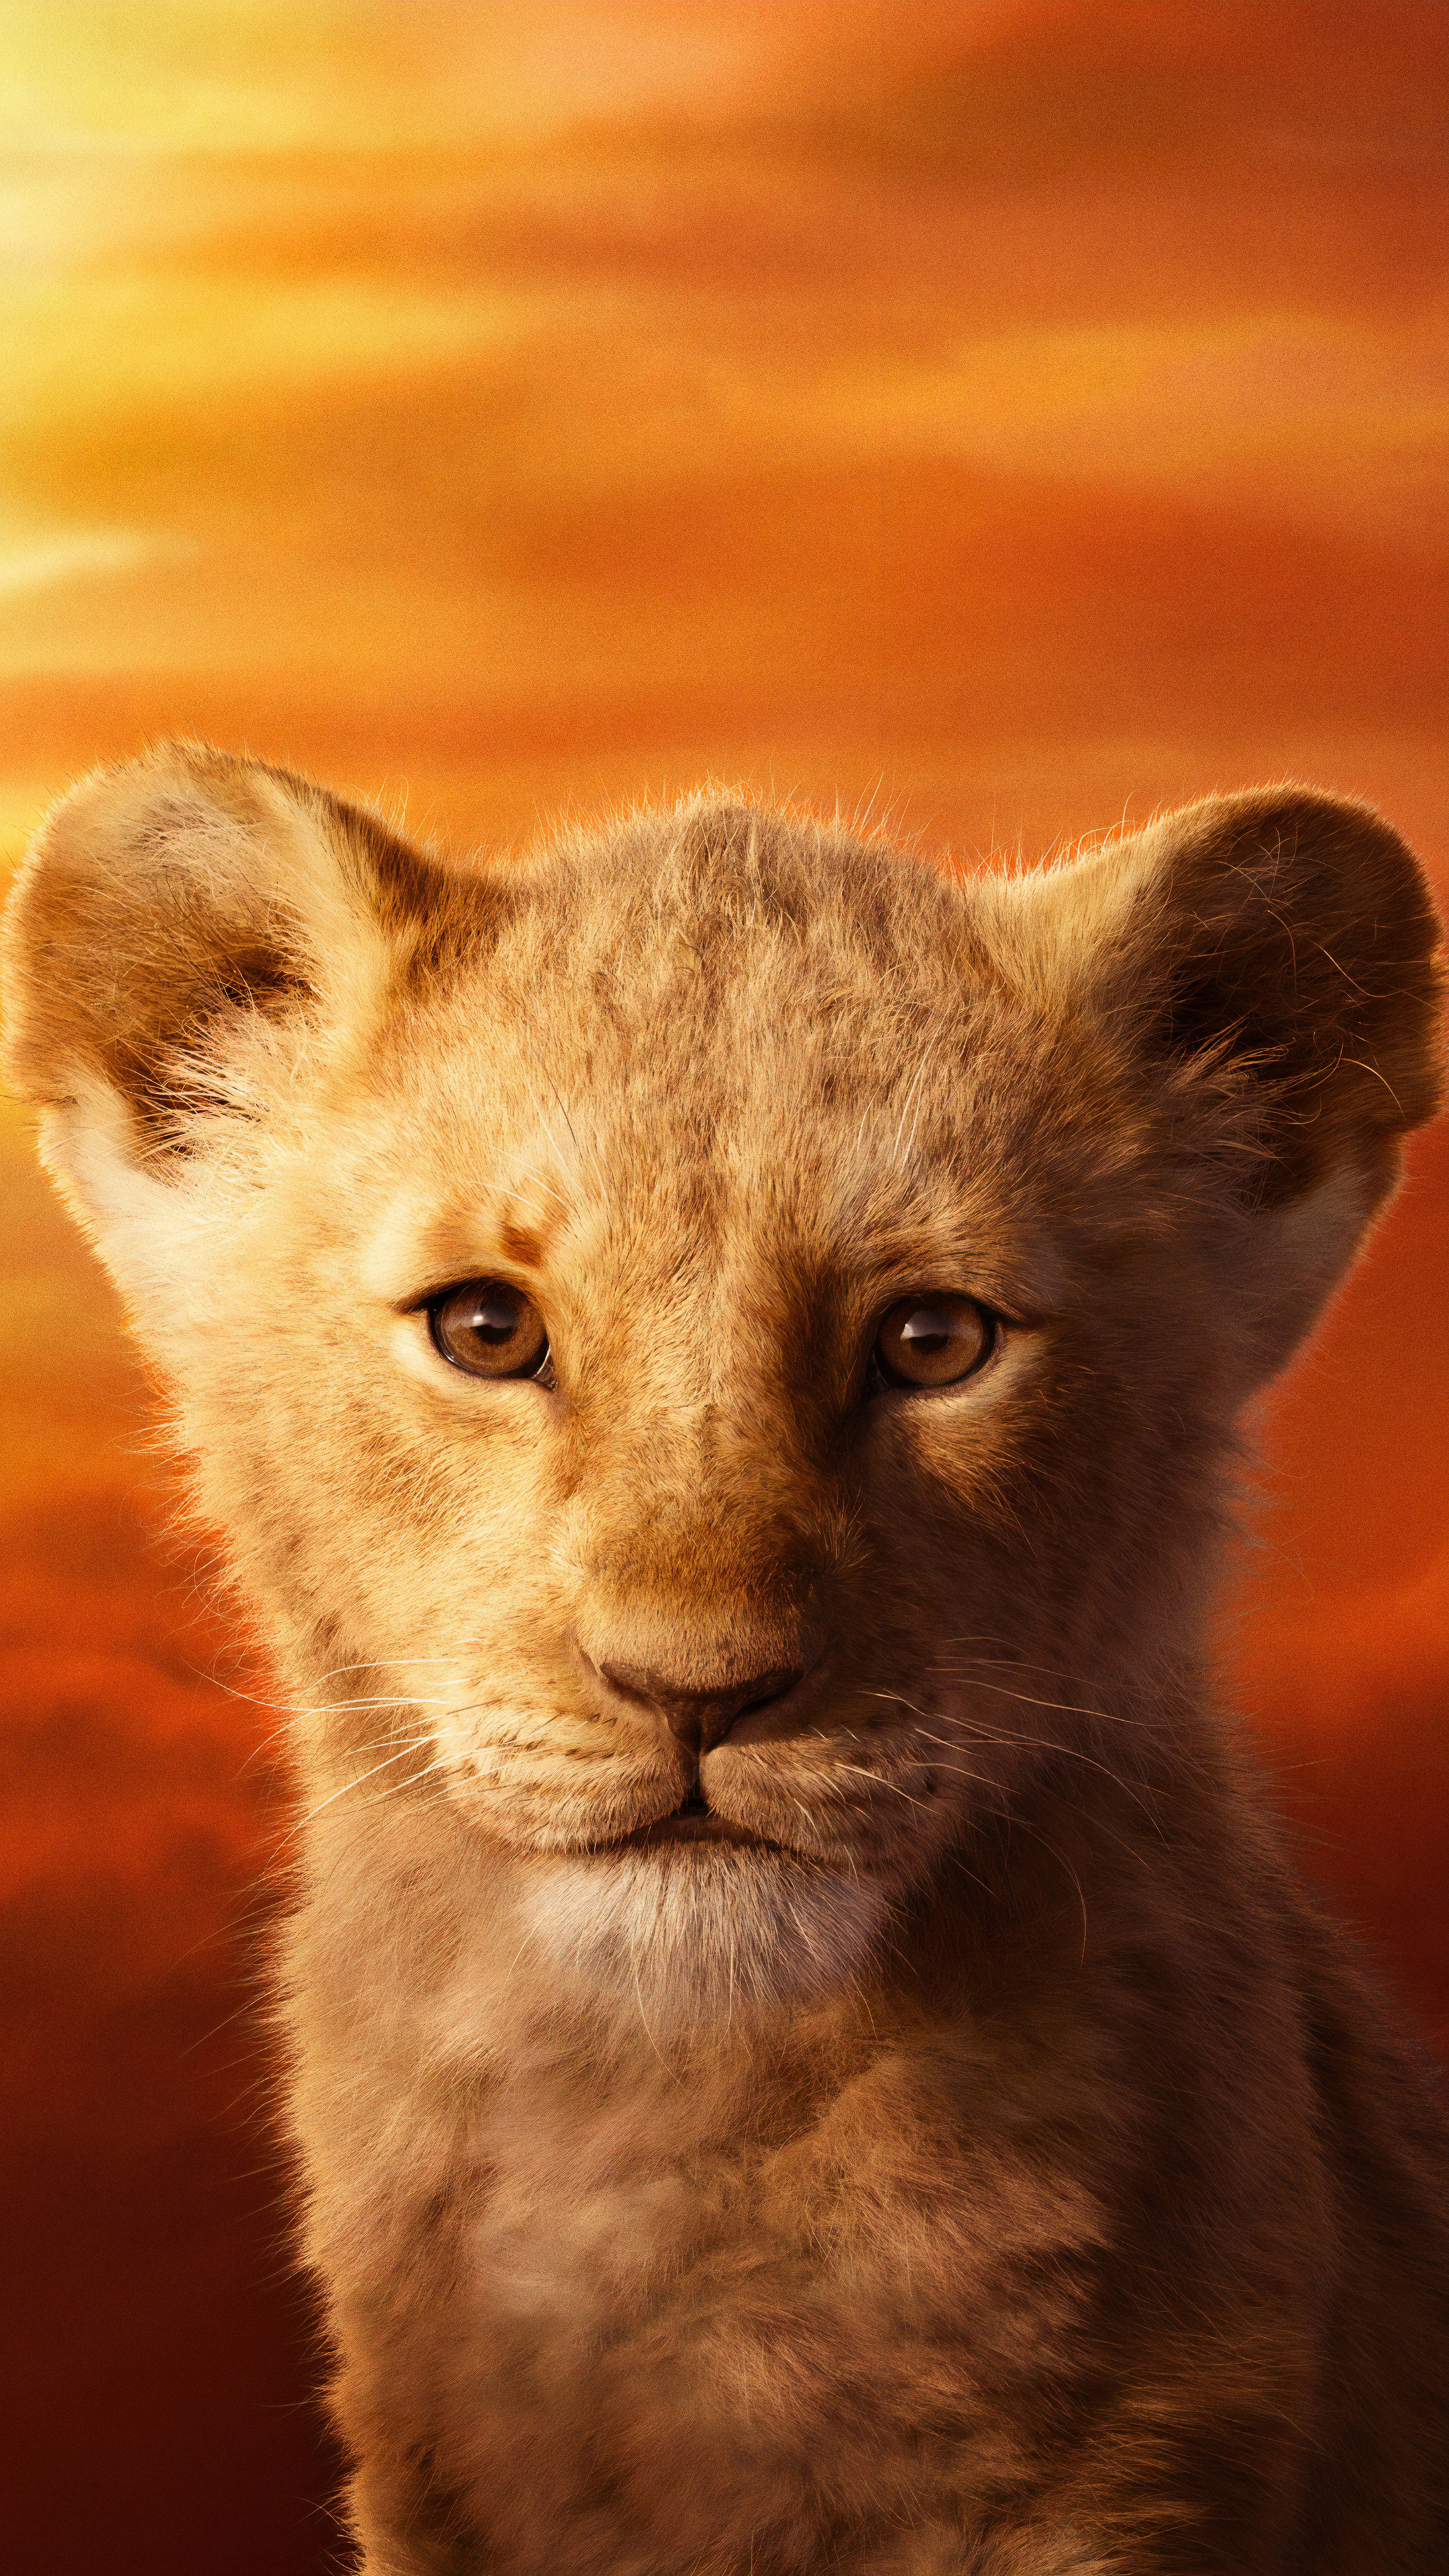 The Lion King, J. D. McCrary as Simba, Stunning 4K imagery, Iconic characters, 2160x3840 4K Phone